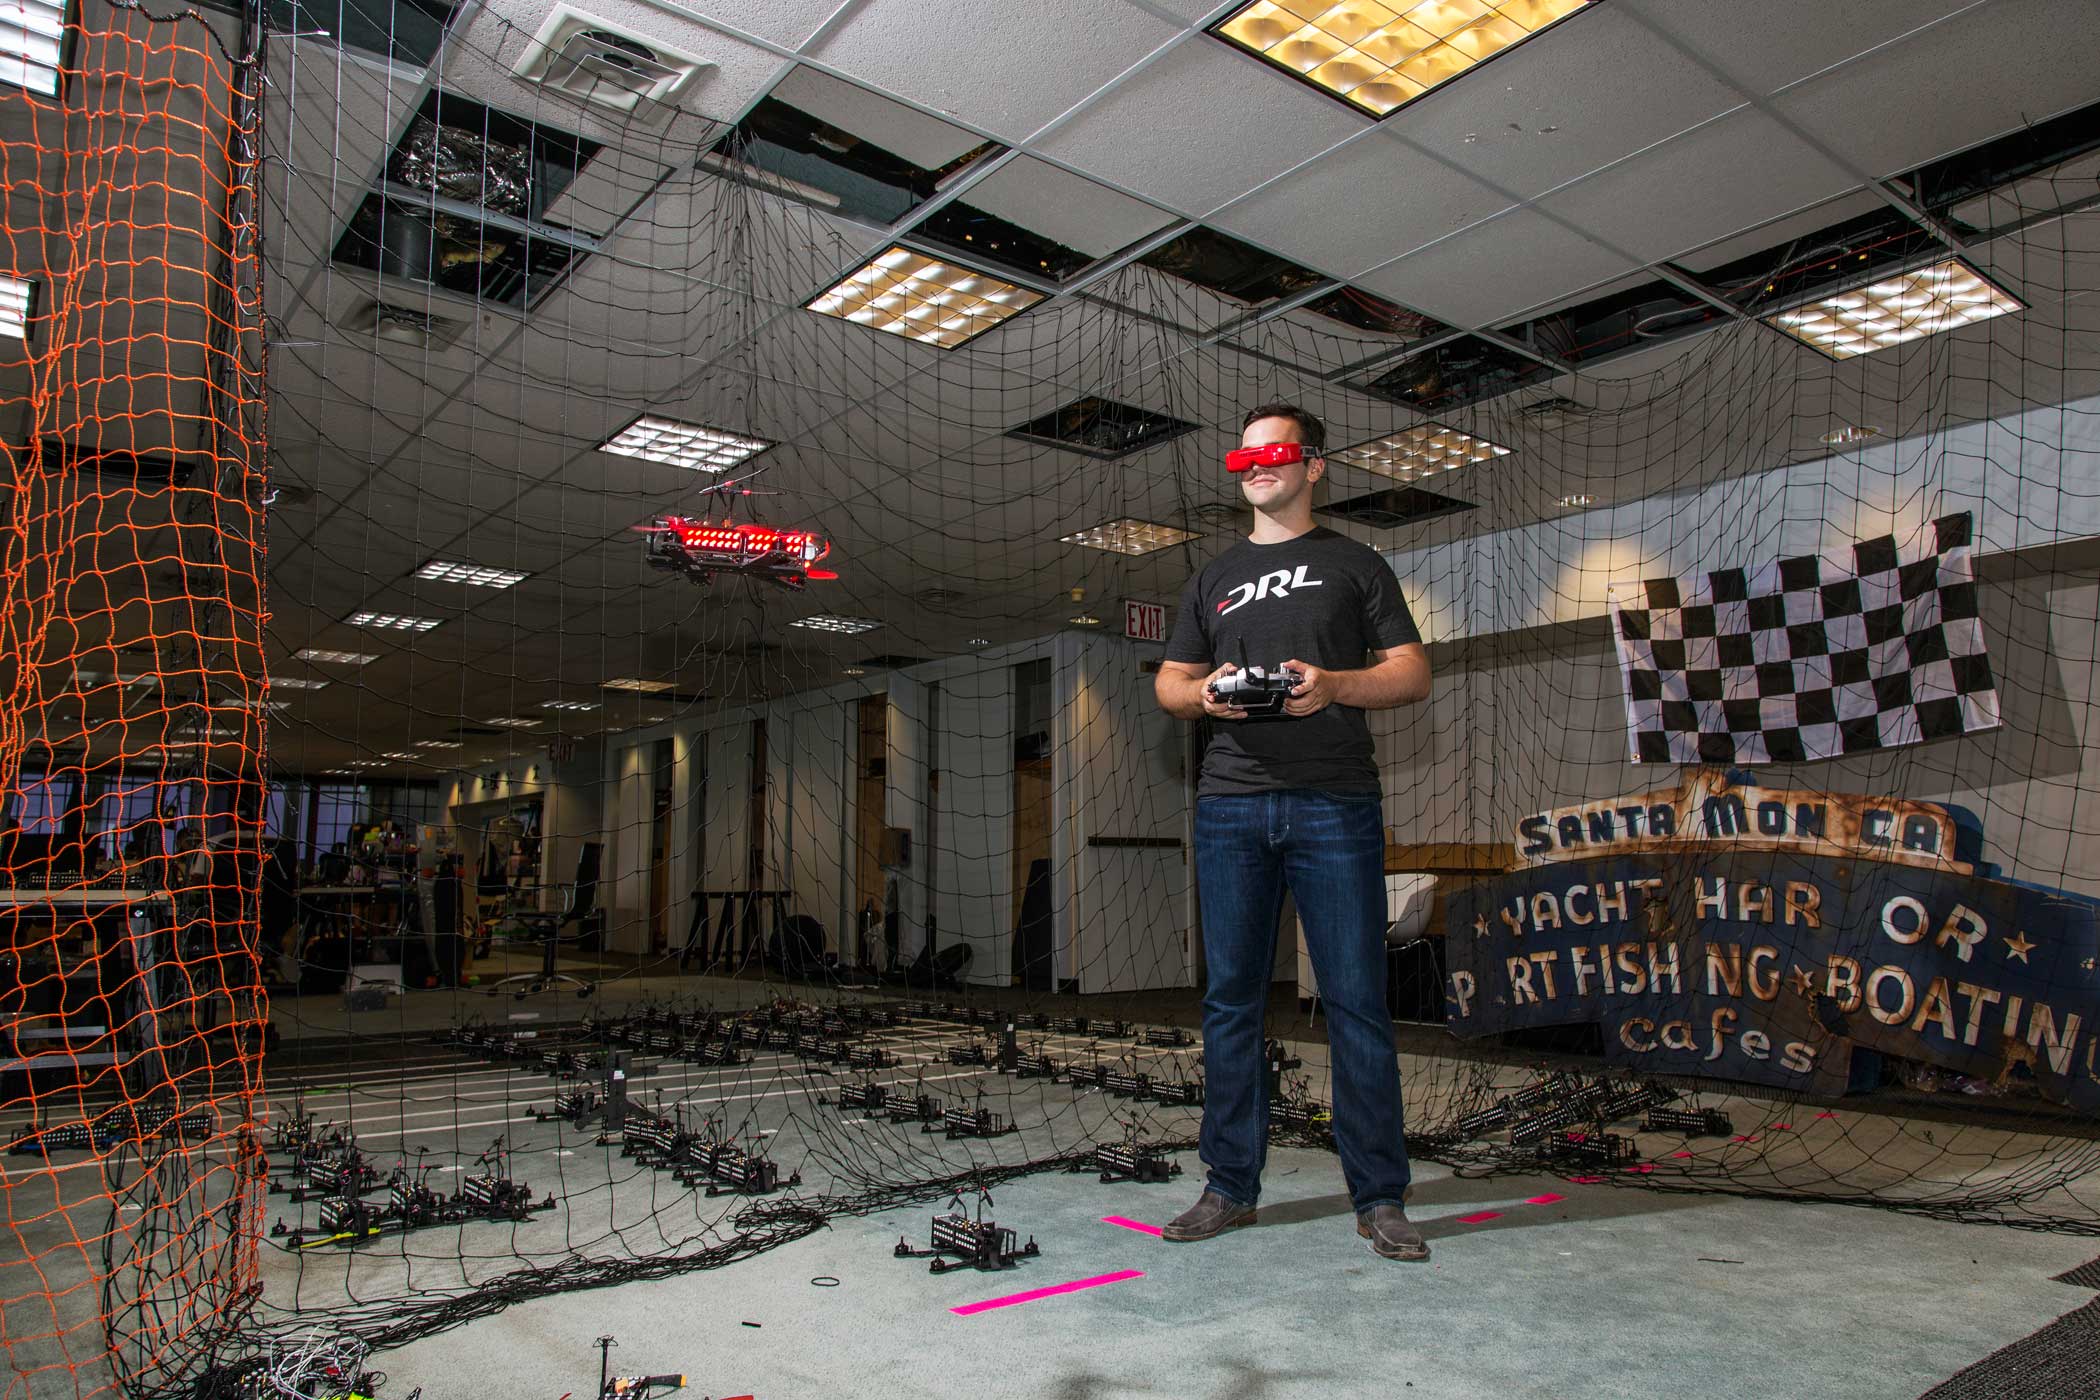 Drone Racing League CEO Nicholas Horbaczerski flys a drone in the DRL offices.